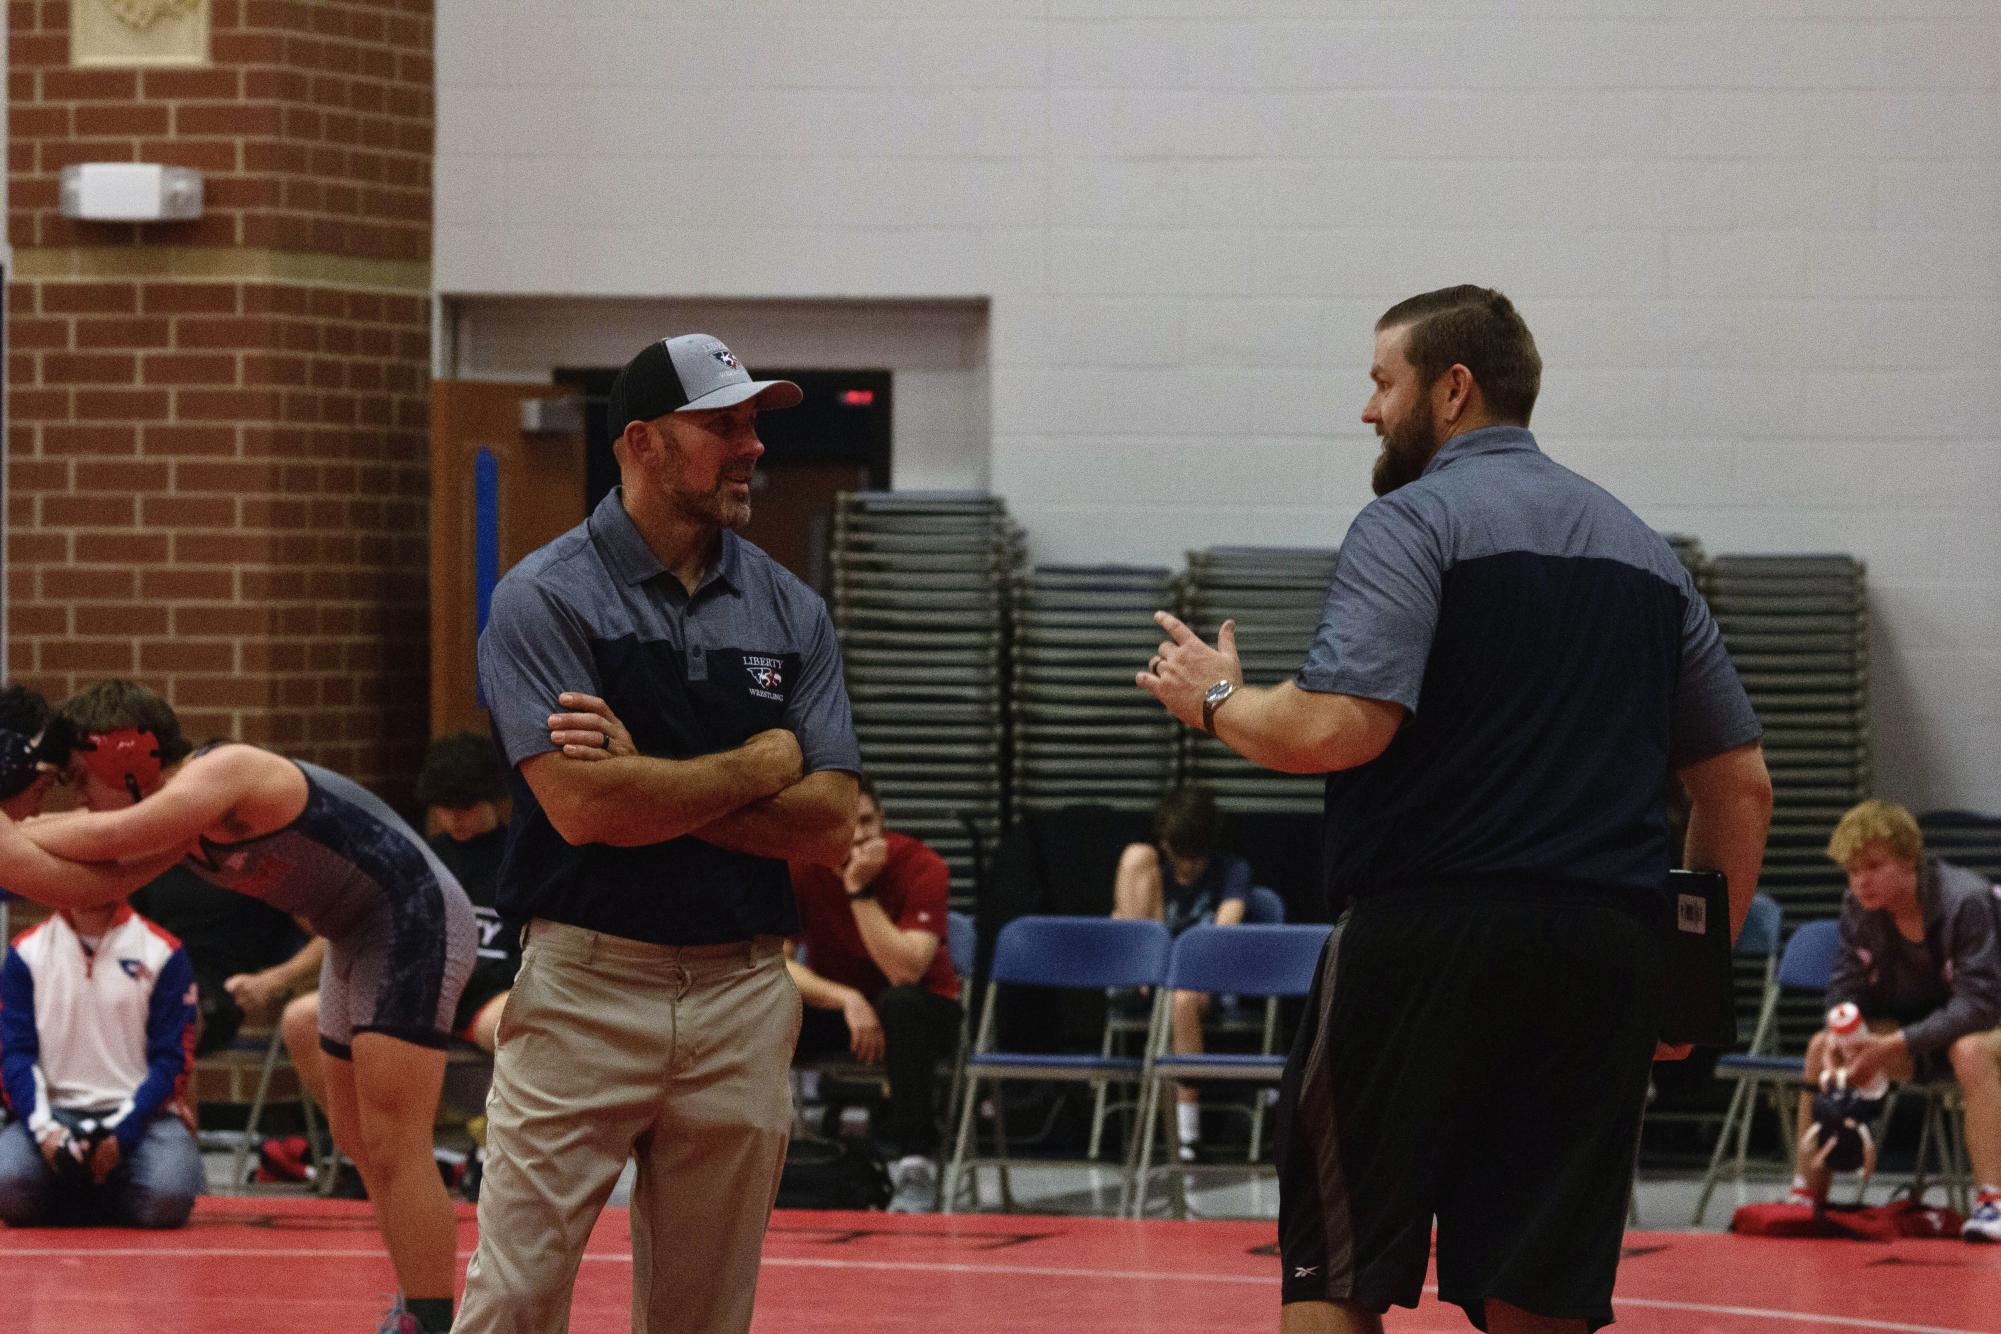 During the Jamboree, the wrestling coaches Haynes and Kling talk to each other about the ongoing match.